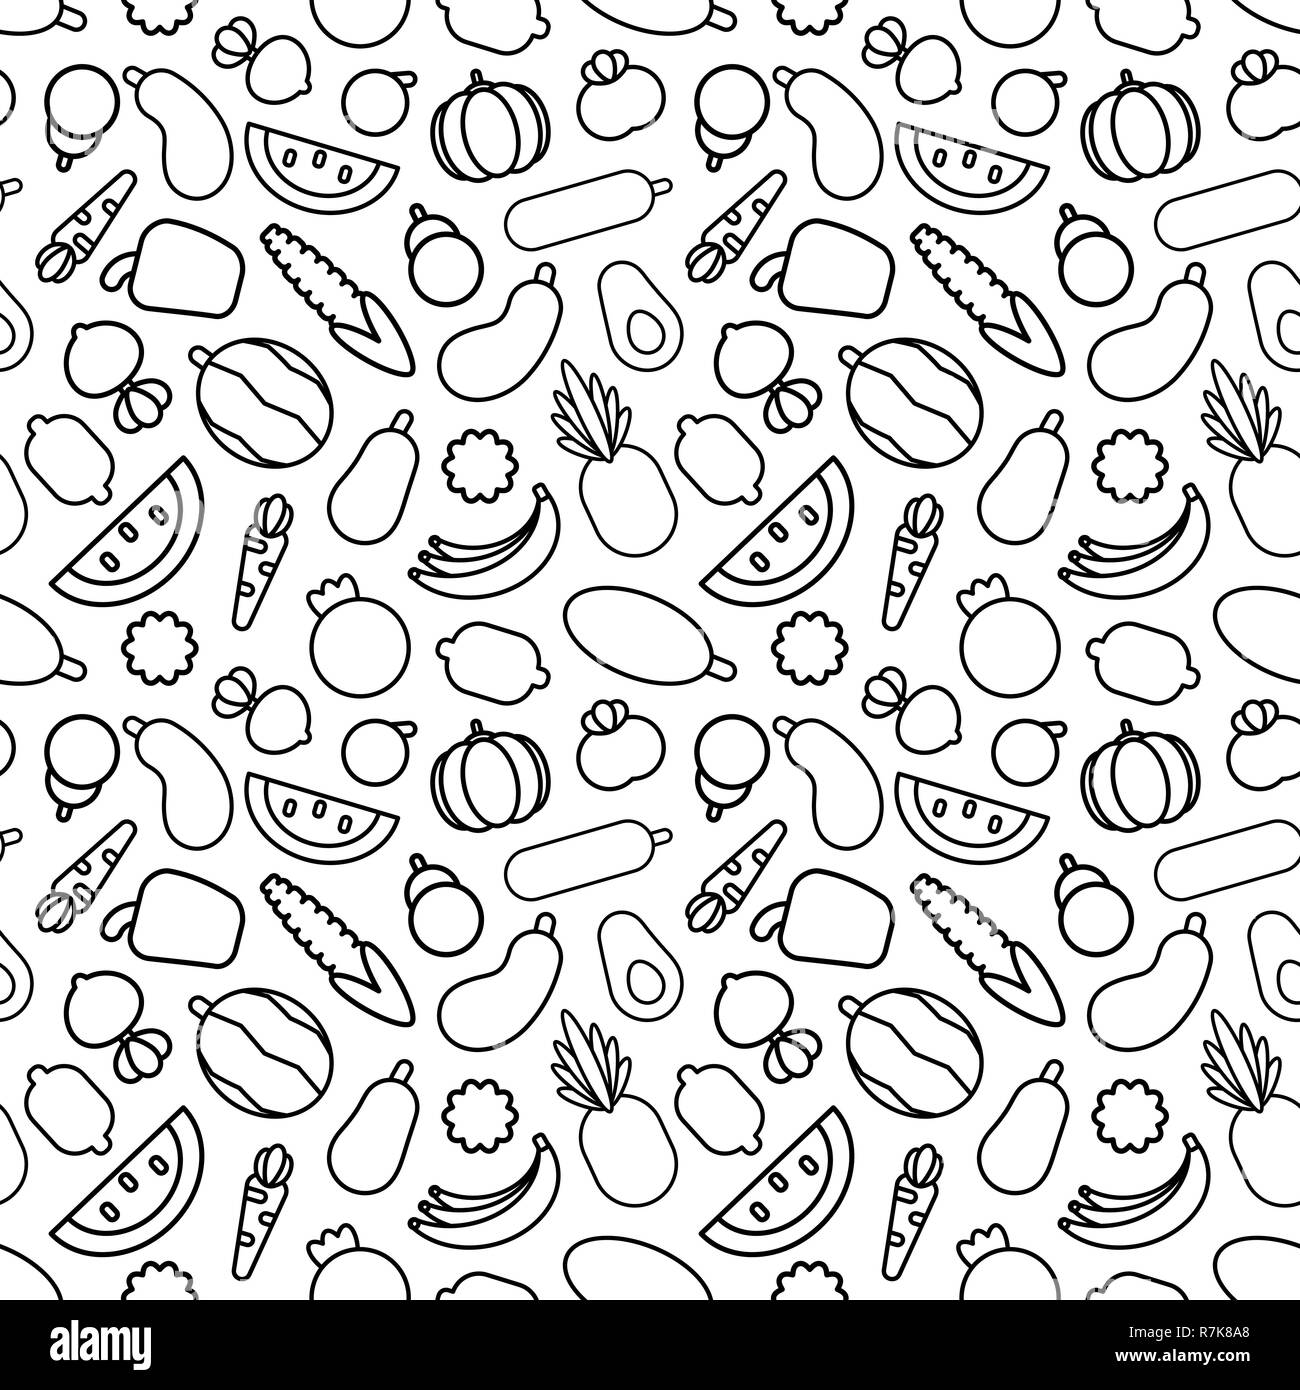 Cartoon cute fruits and vegetables on white background. Seamless pattern. Linear coloring illustration. Stock Vector